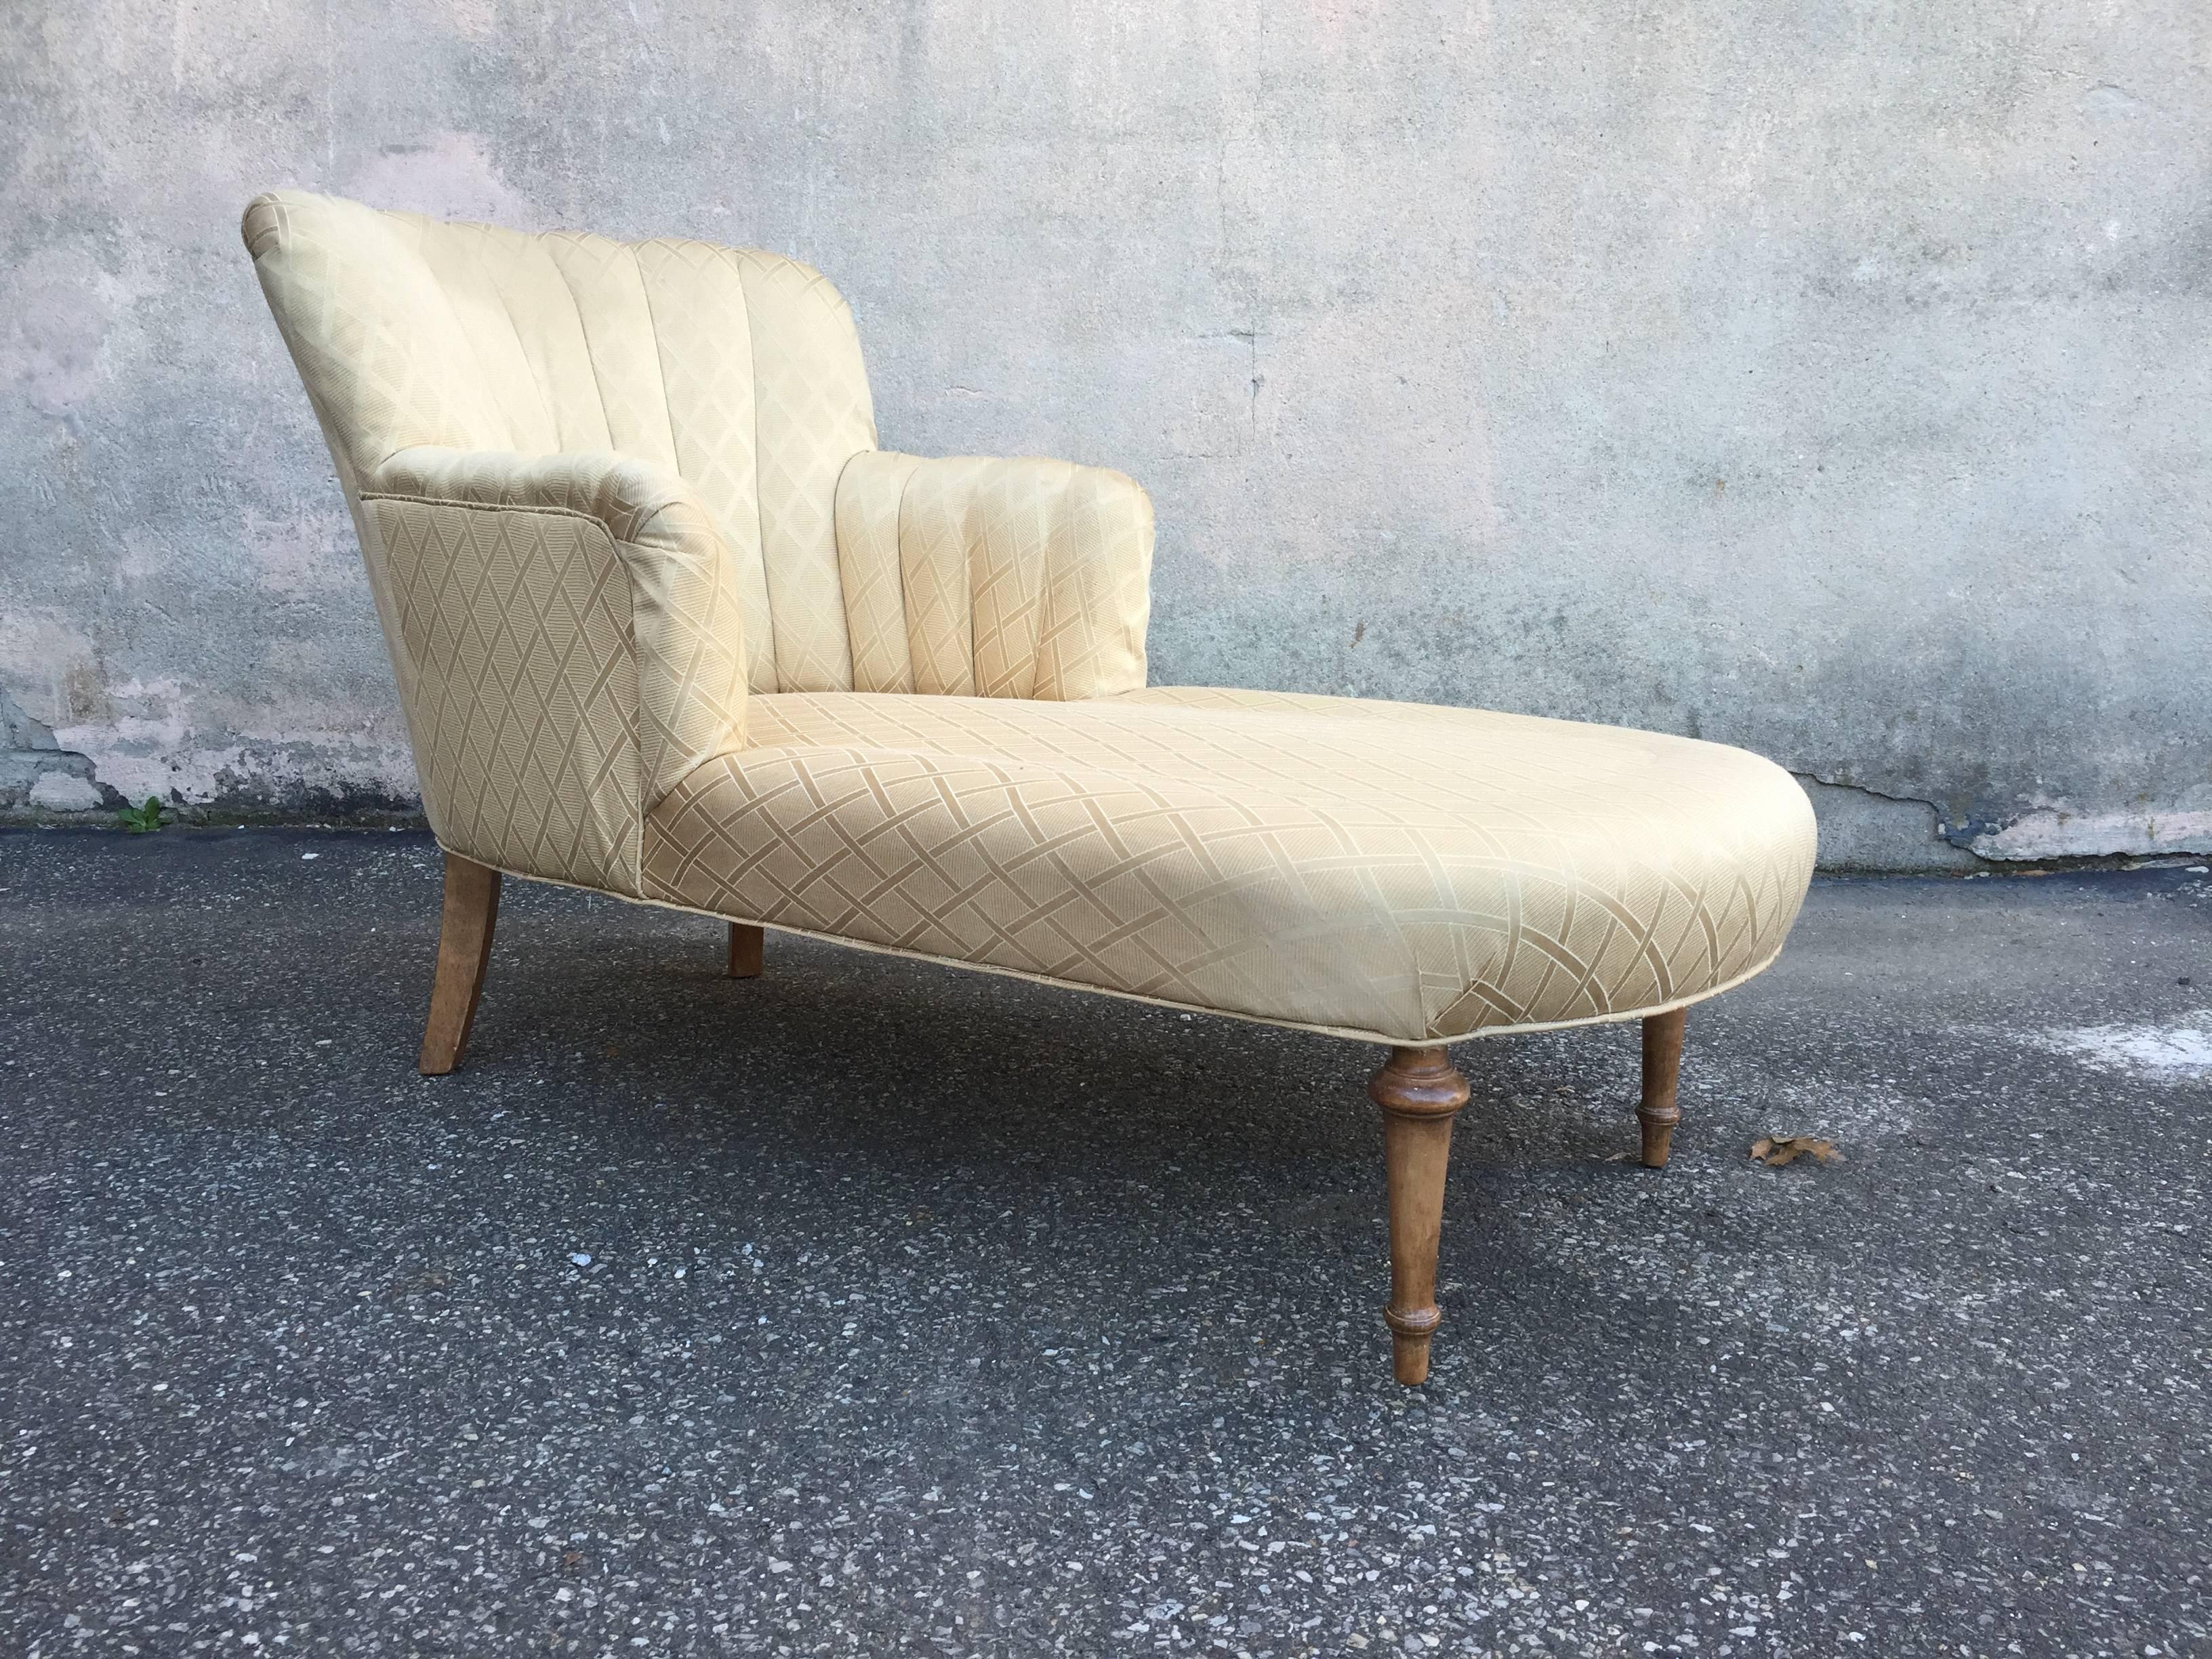 Petite Hollywood chaise longue, will reupholster wcom for minimal cost, this item is on sale for a clearance price.